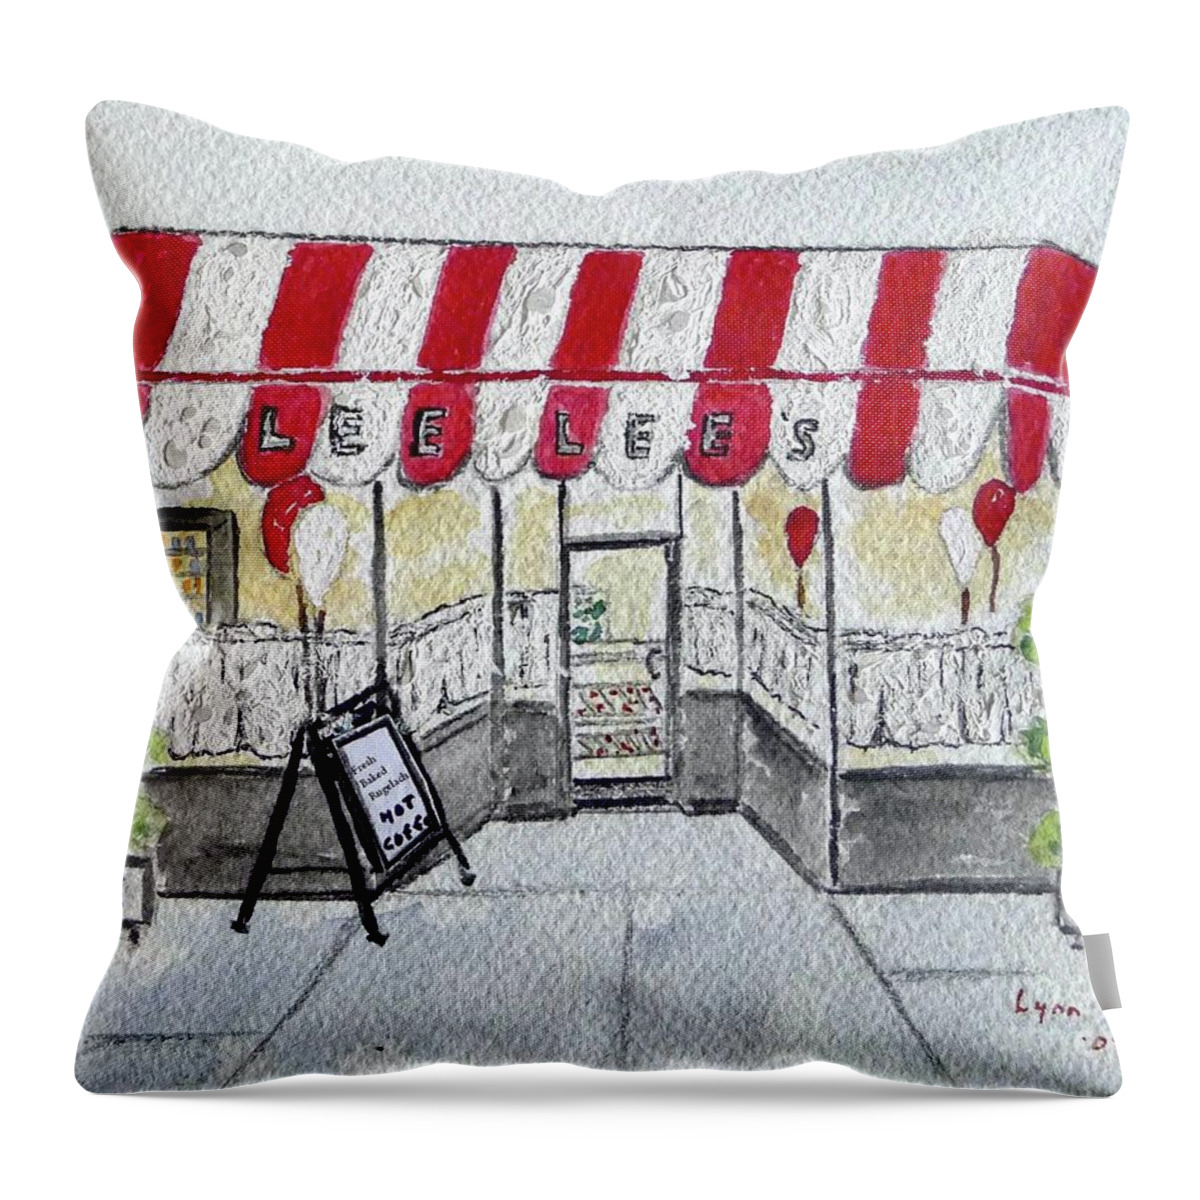 Lee Lee's Baked Goods Throw Pillow featuring the painting Lee Lee's Baked Goods by Afinelyne